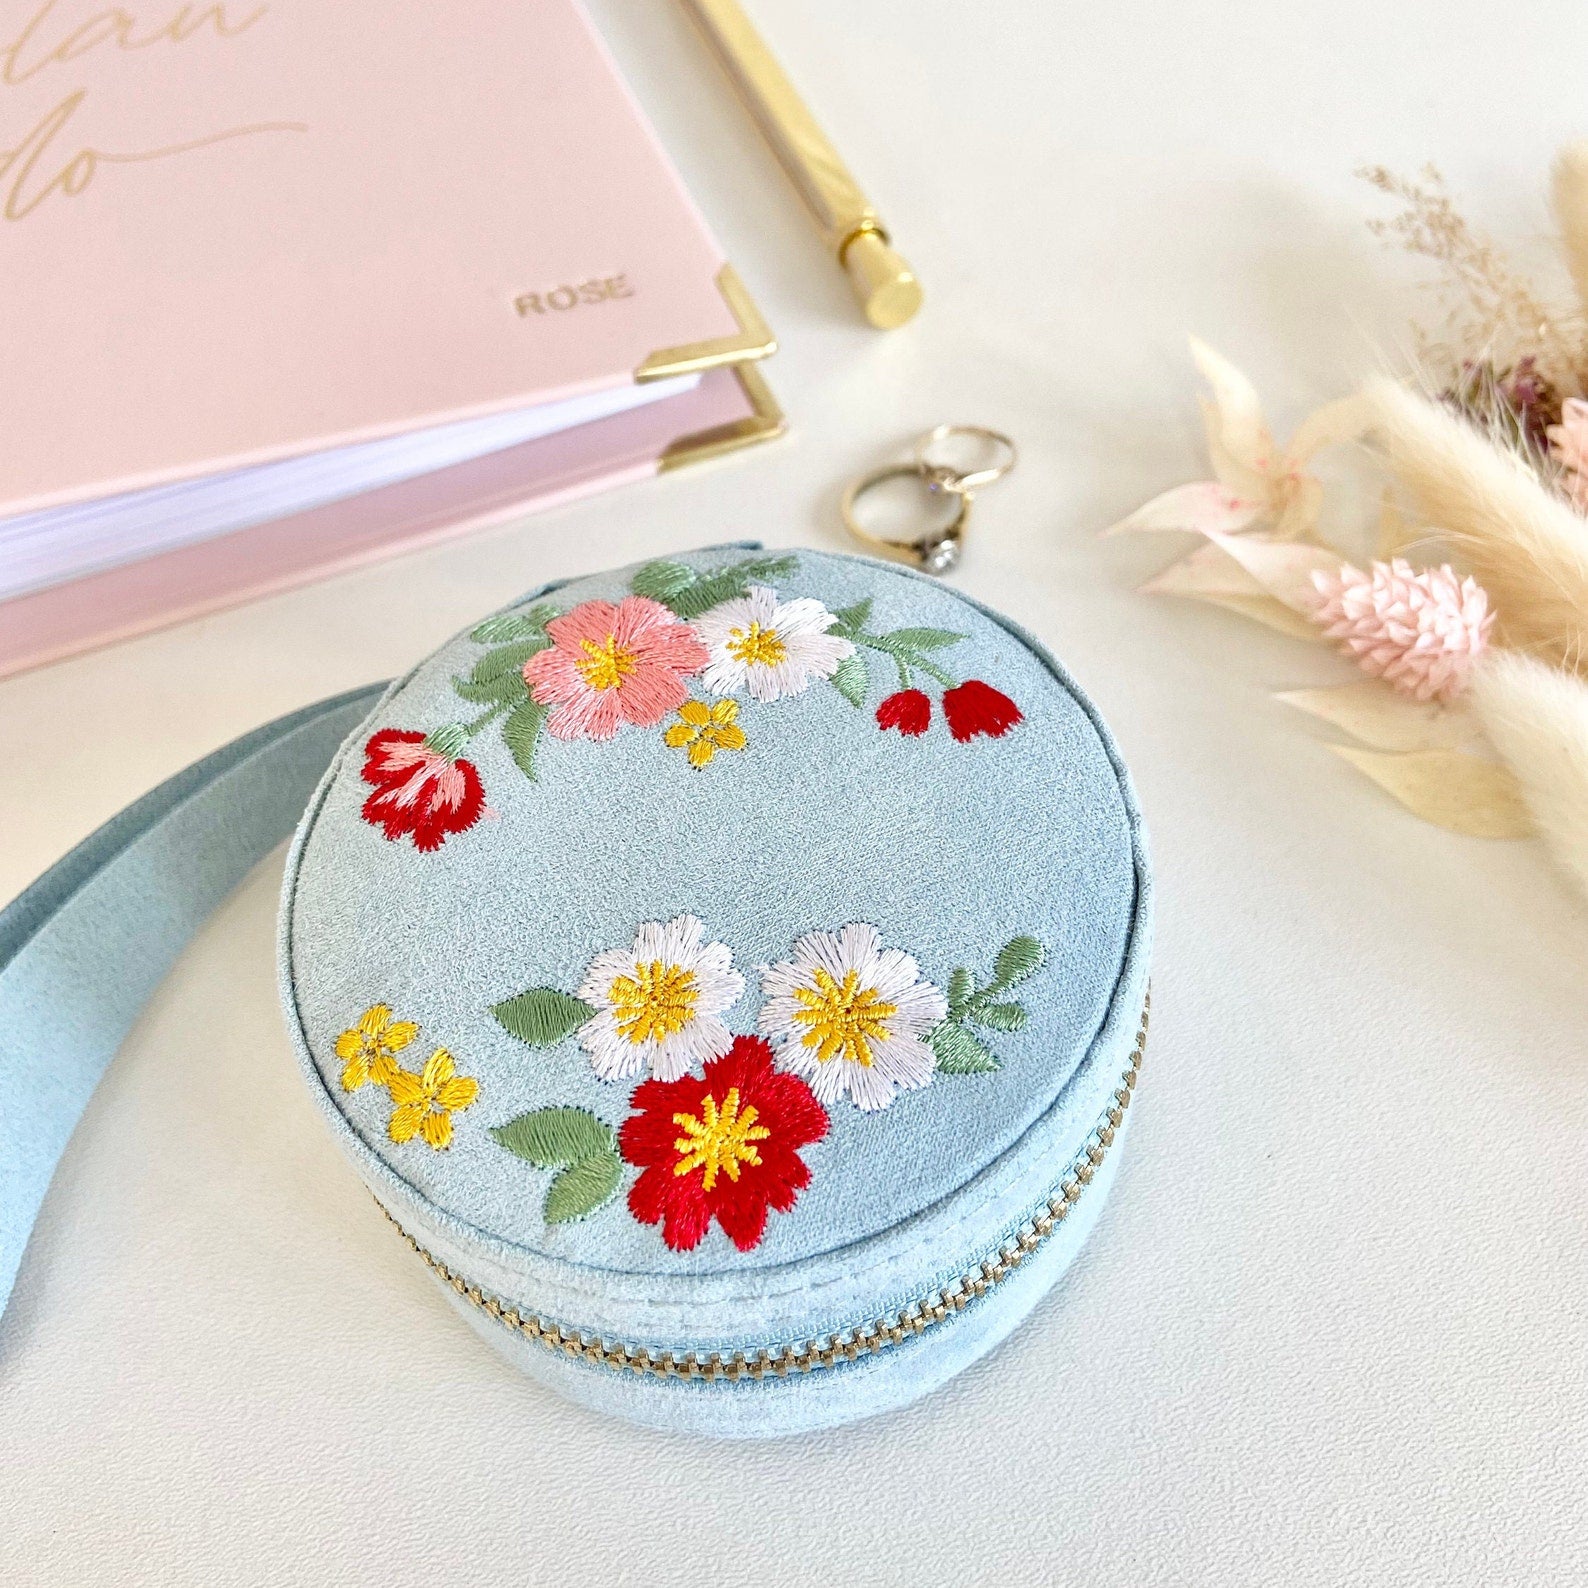 Personalised Embroidered Floral Round Jewellery Box - Penny Rose Home and Gifts